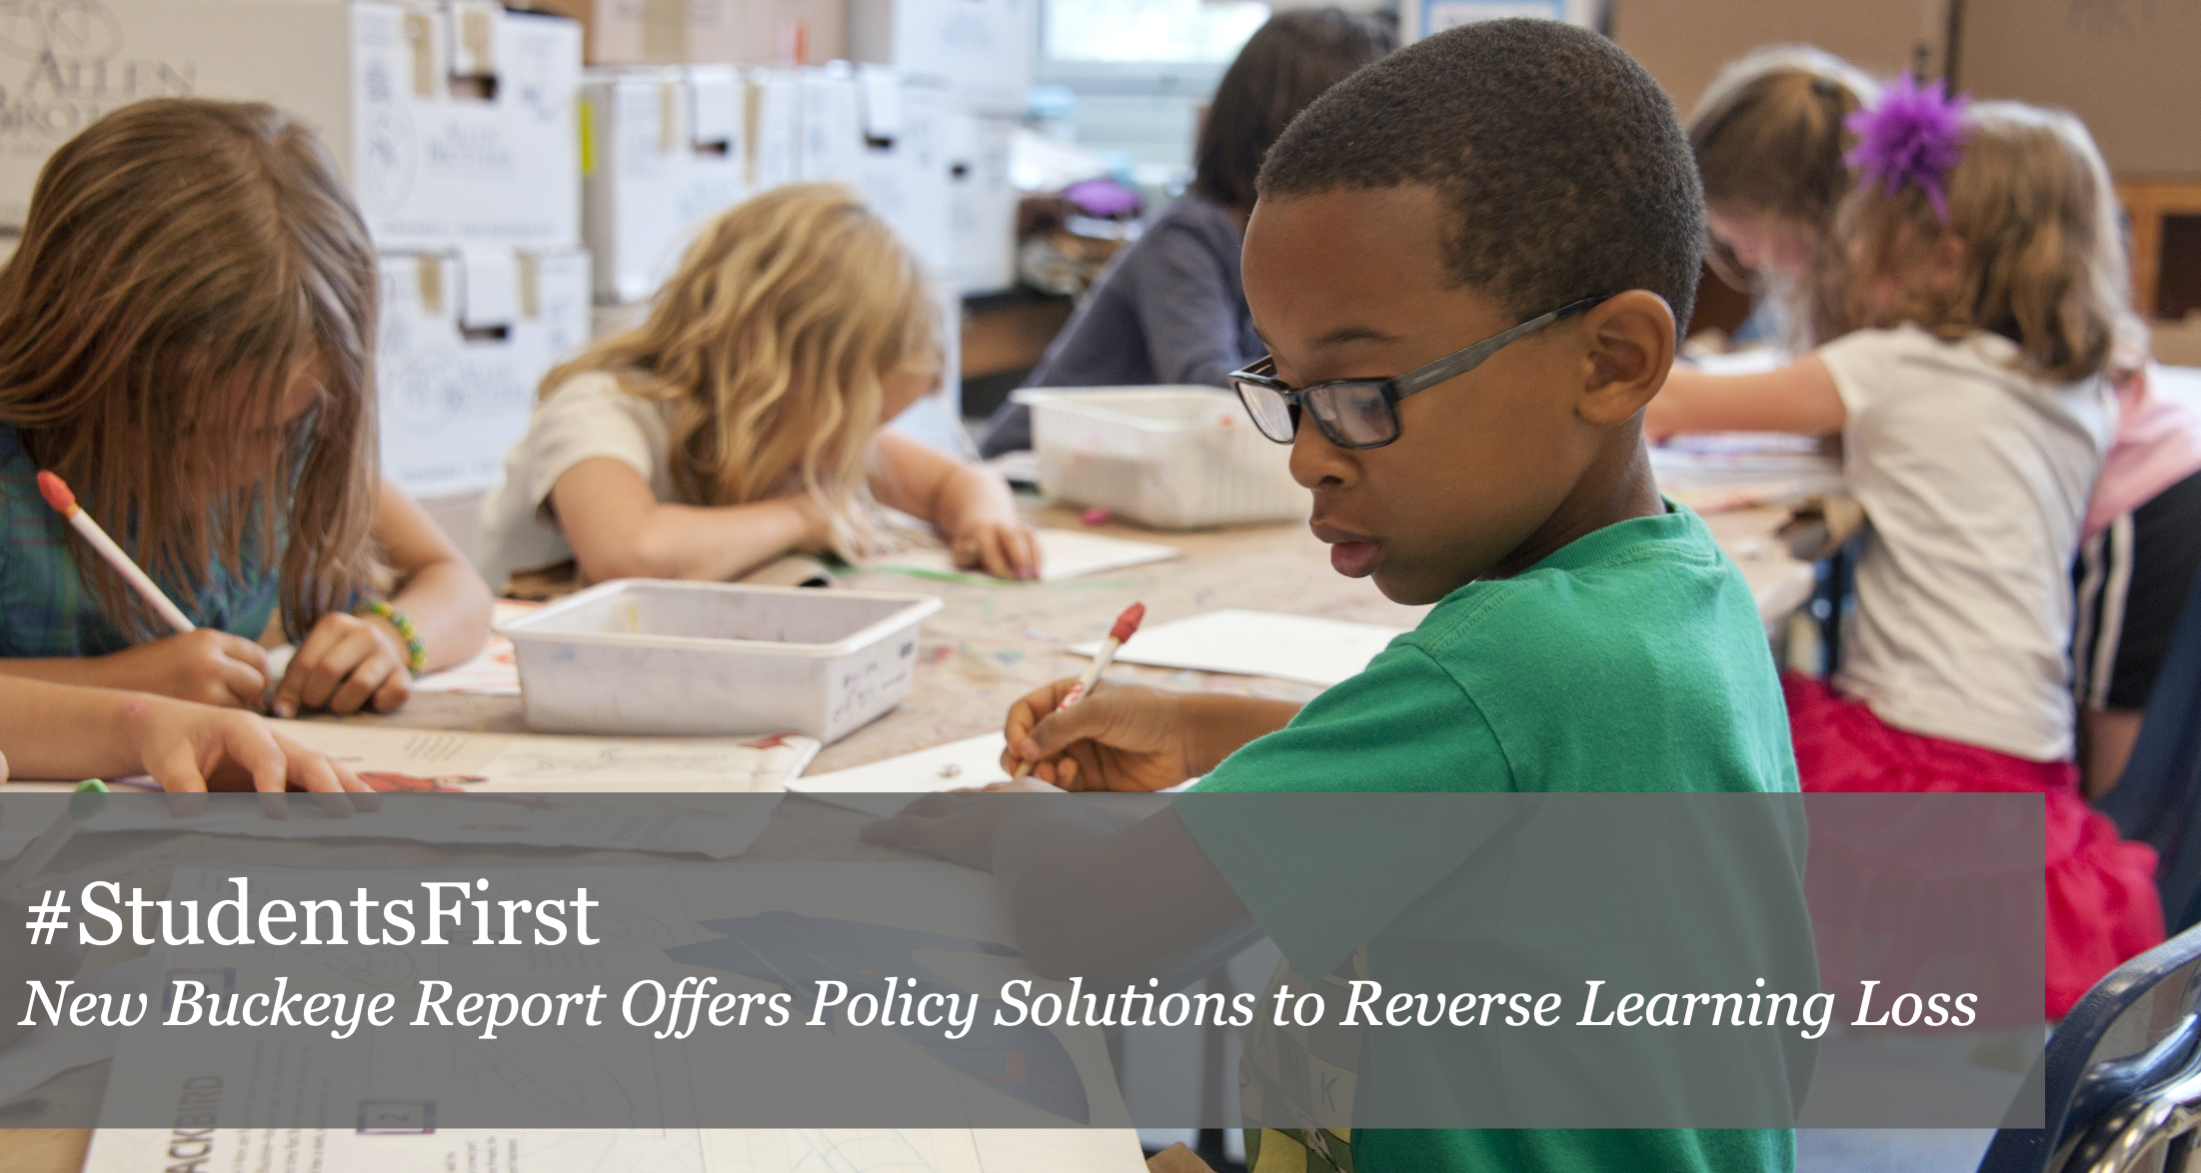 New Buckeye Institute Report Offers #StudentsFirst Reforms to Help Regain Lost Learning